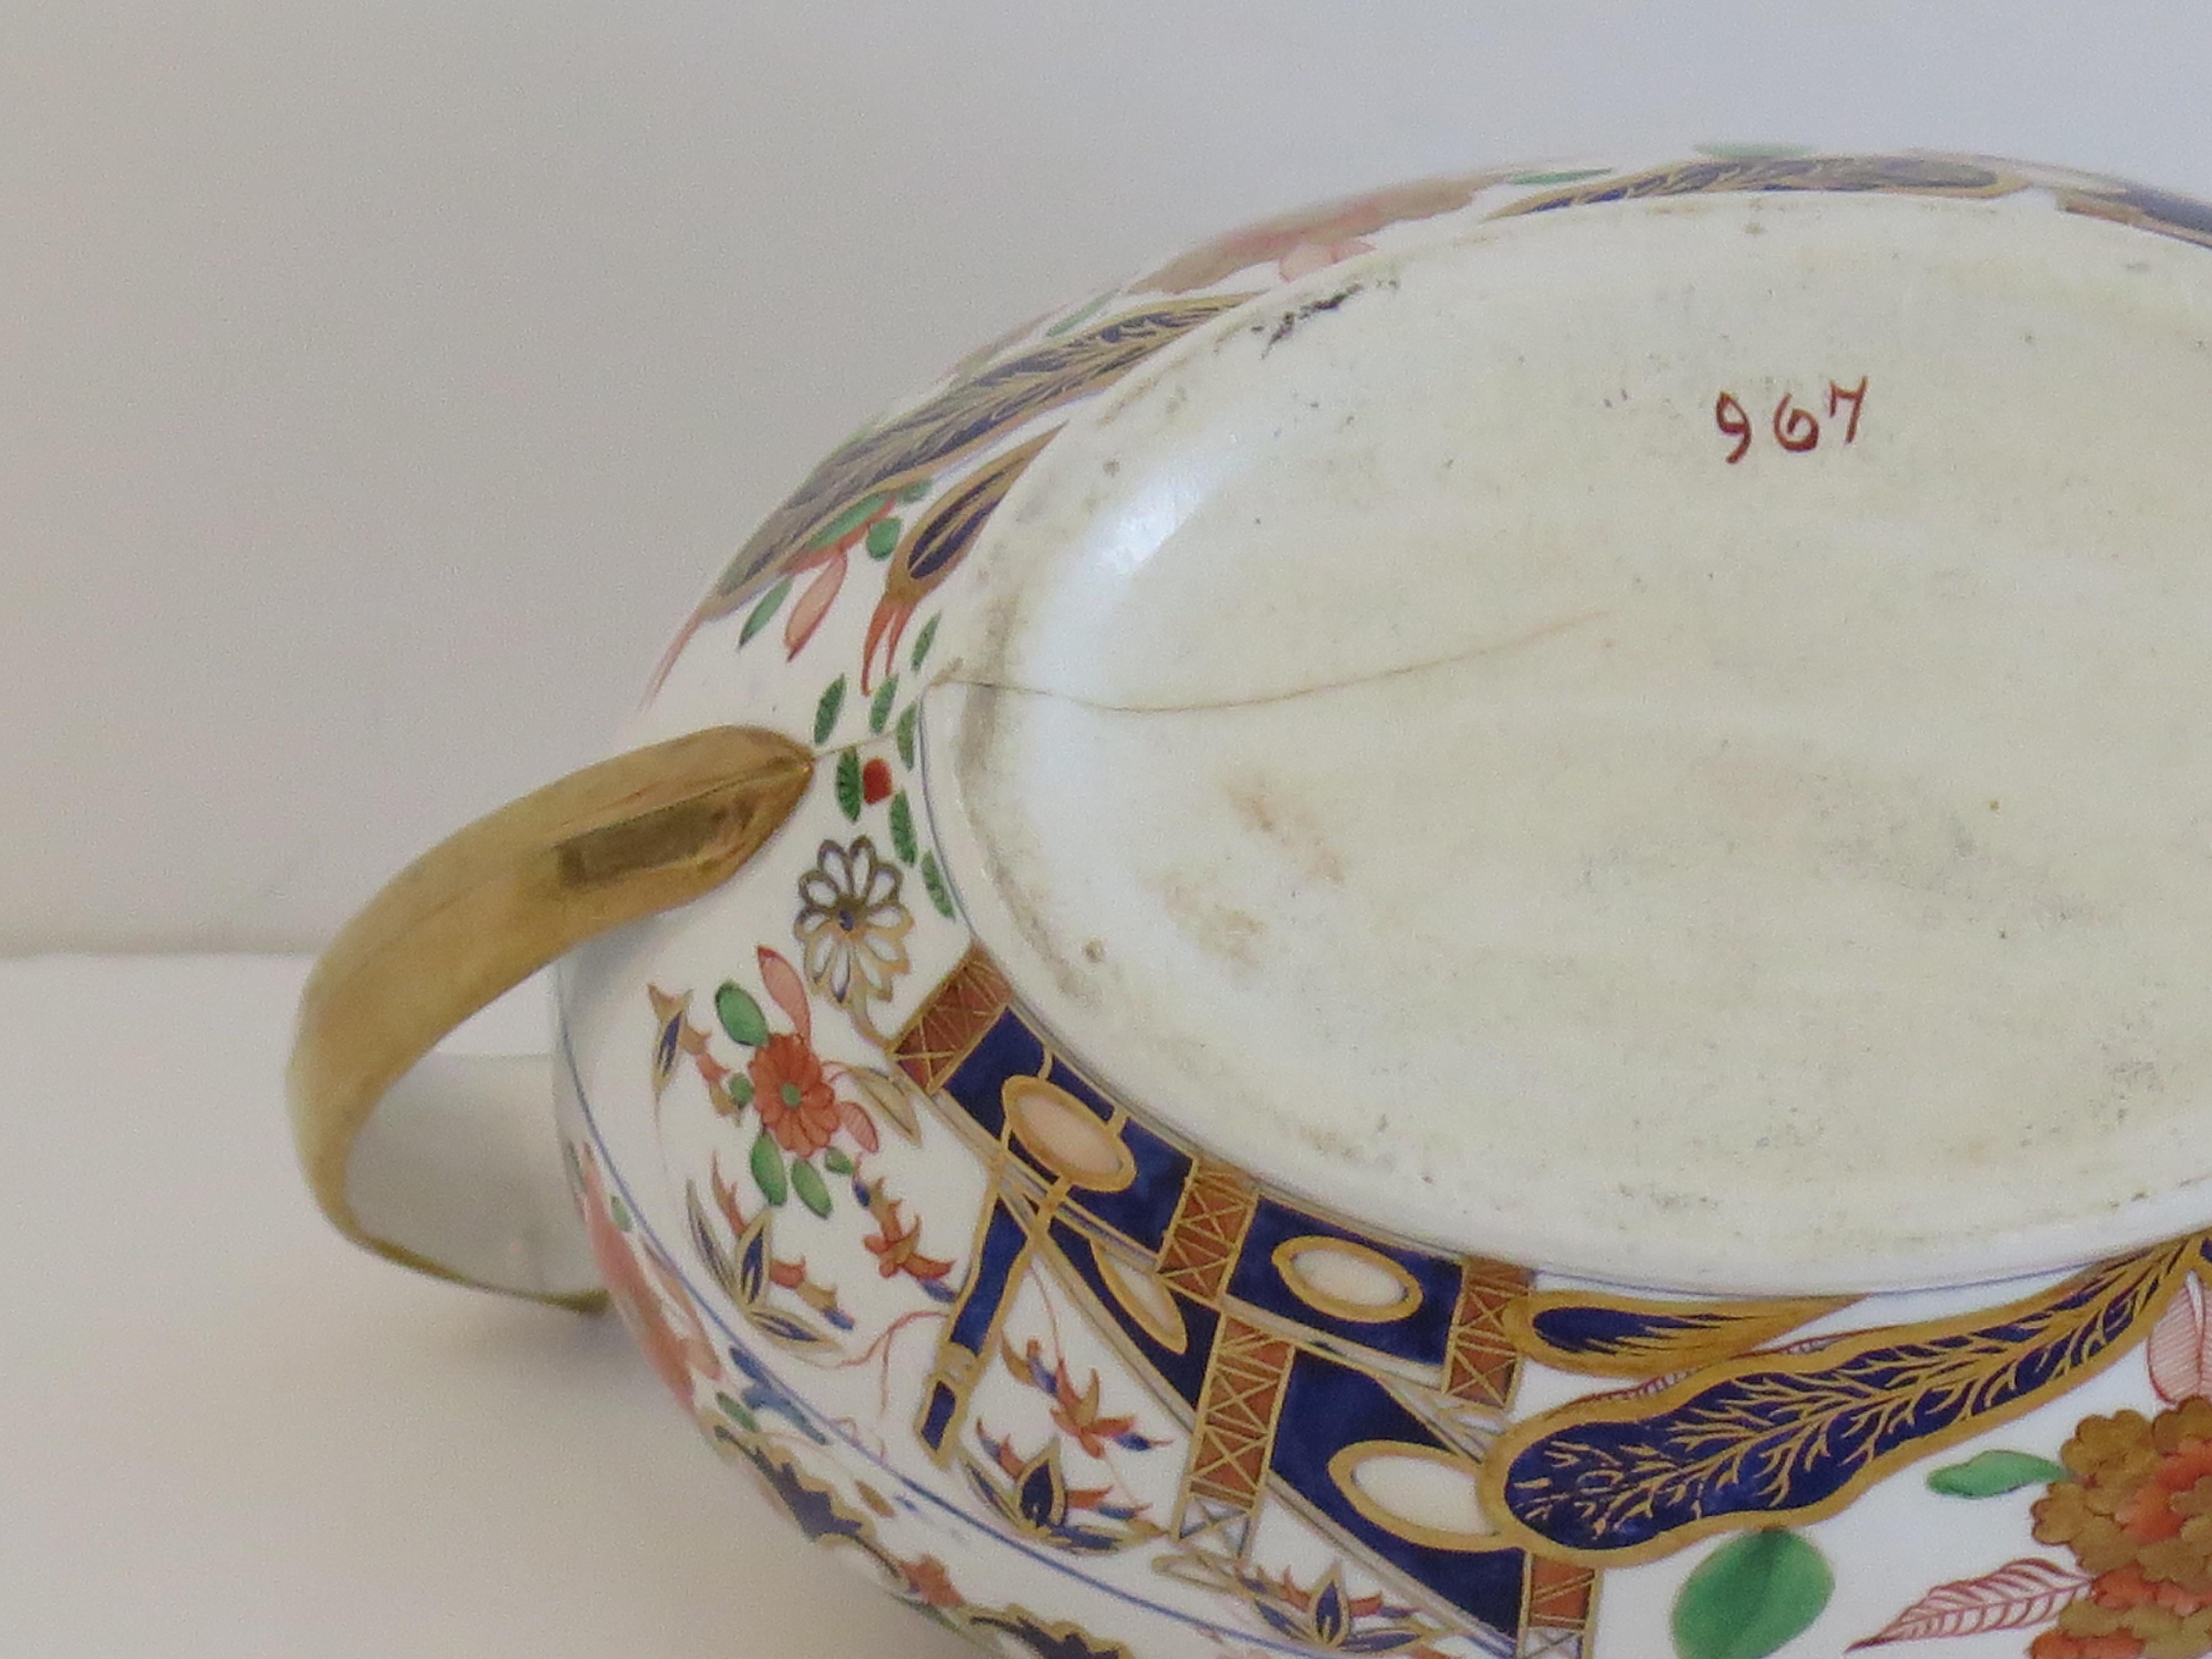 Spode Porcelain Sucrier Hand Painted and Gilded Pattern 967, circa 1810 For Sale 3